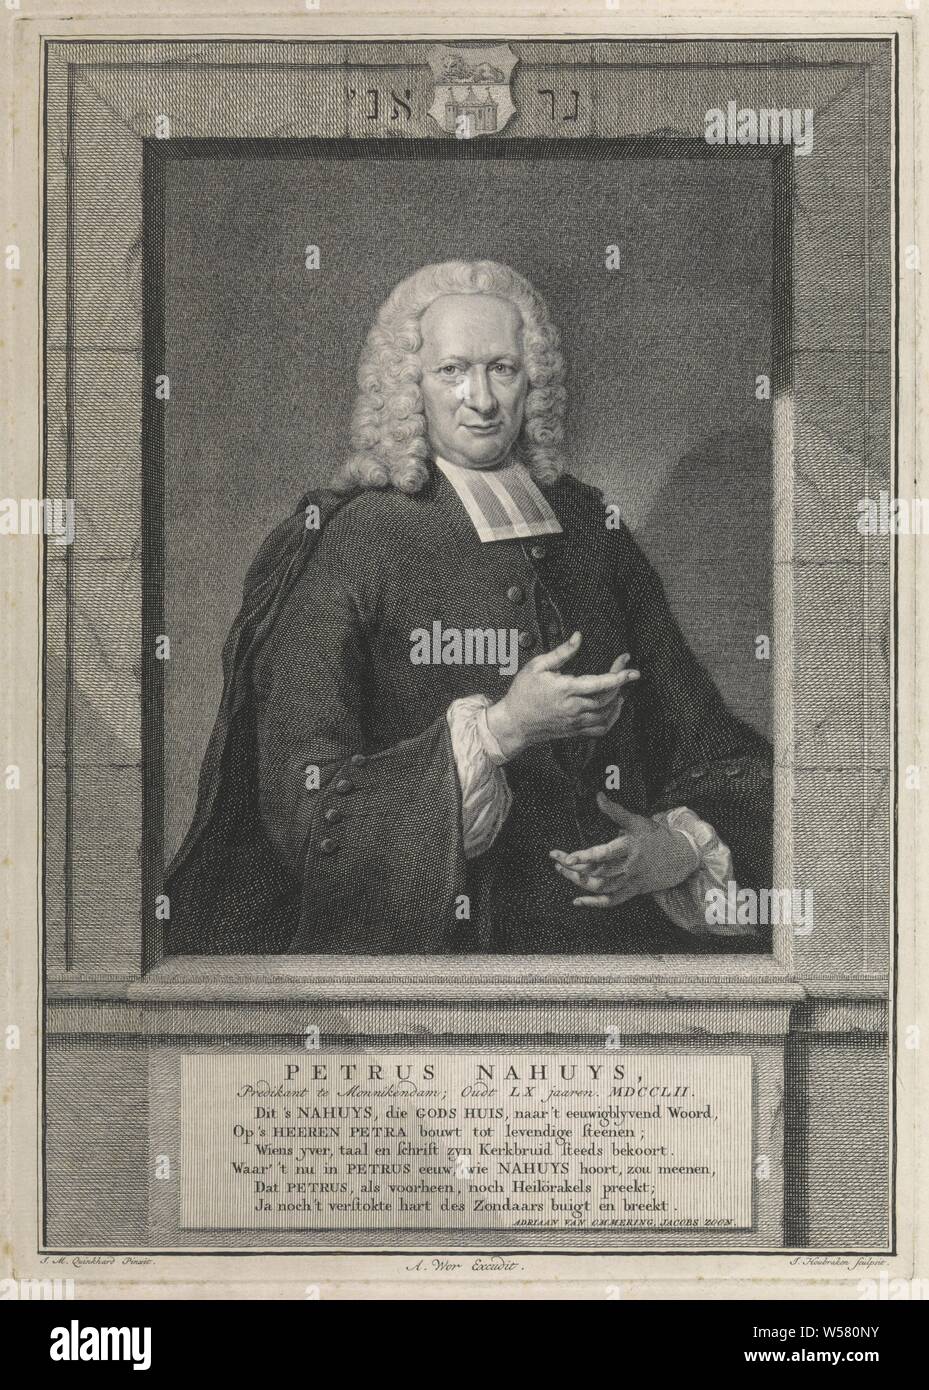 Portrait of Petrus Nahuys Petrus Nahuys (title on object), Portrait halfway to the right of Petrus Nahuys in an architectural window. At the top are family crest and a line in Hebrew. Below his name and information in two lines in Dutch and below that a six-line verse in Dutch, Petrus Nahuys, Jacob Houbraken (mentioned on object), Amsterdam, 1750 - 1755, paper, engraving, h 305 mm × w 218 mm Stock Photo